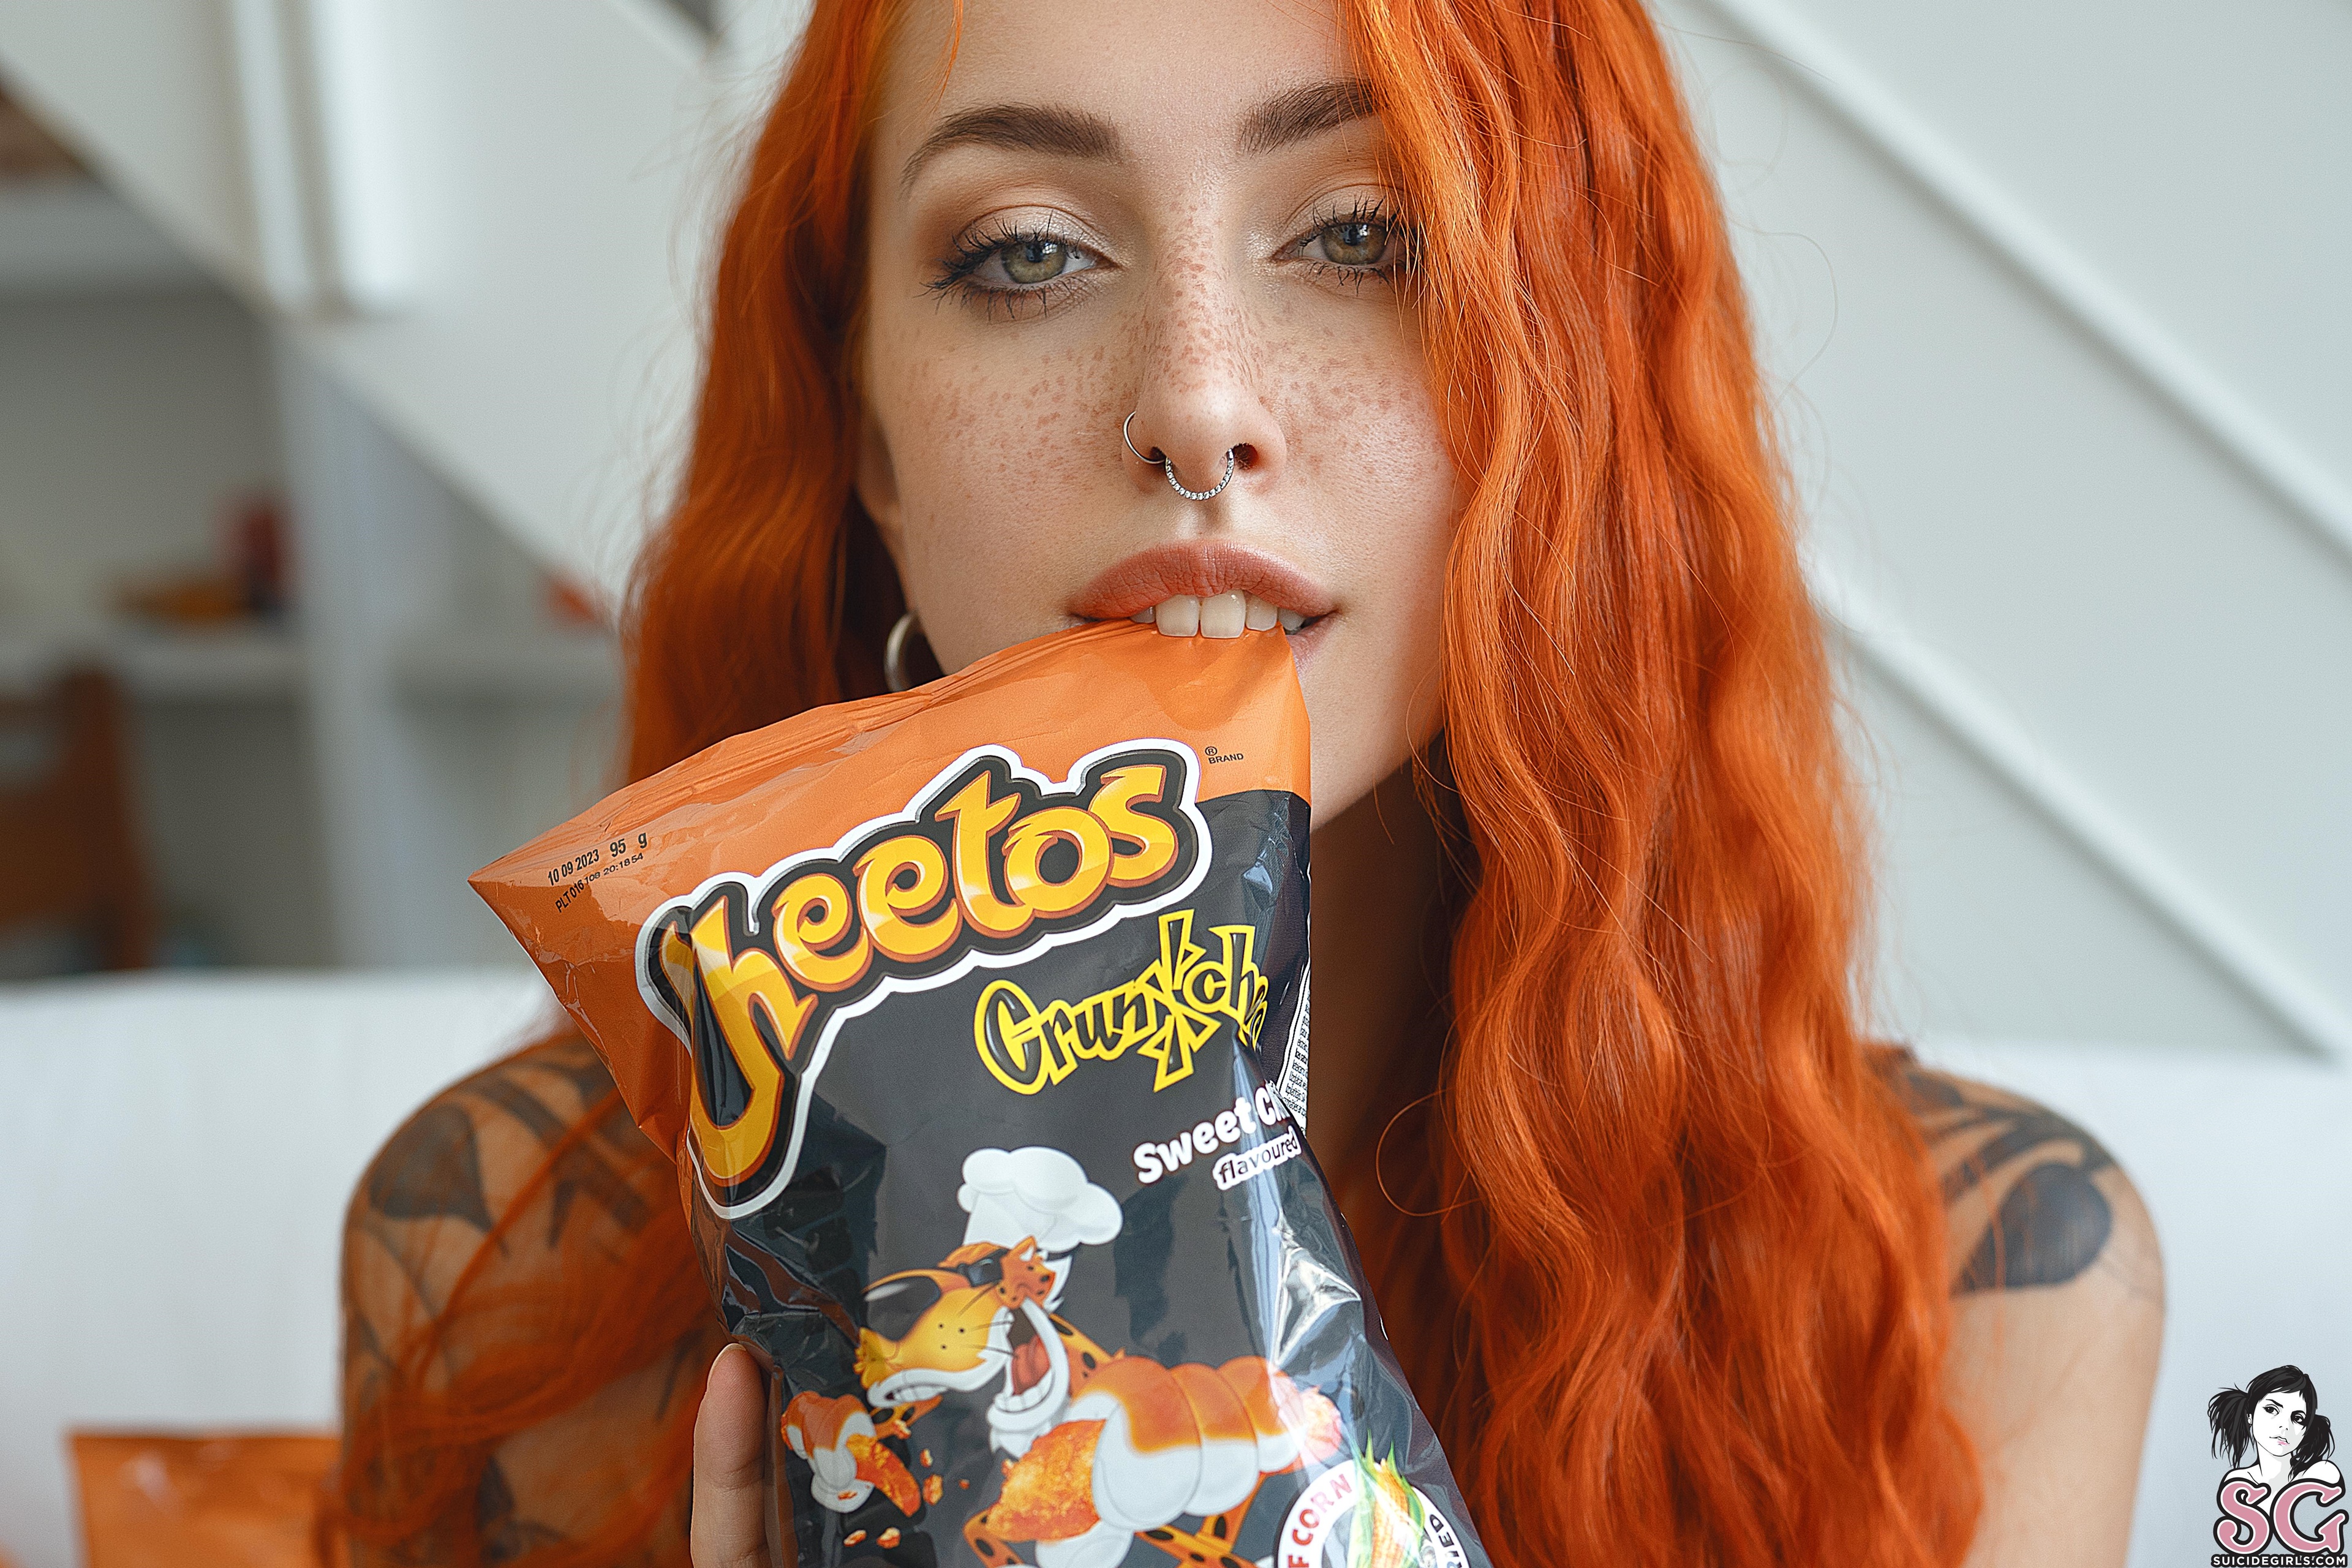 Redhead Women Model Inked Girls Freckles Looking At Viewer Tattoo Pierced Nose Cheetos Italian Face  3840x2560